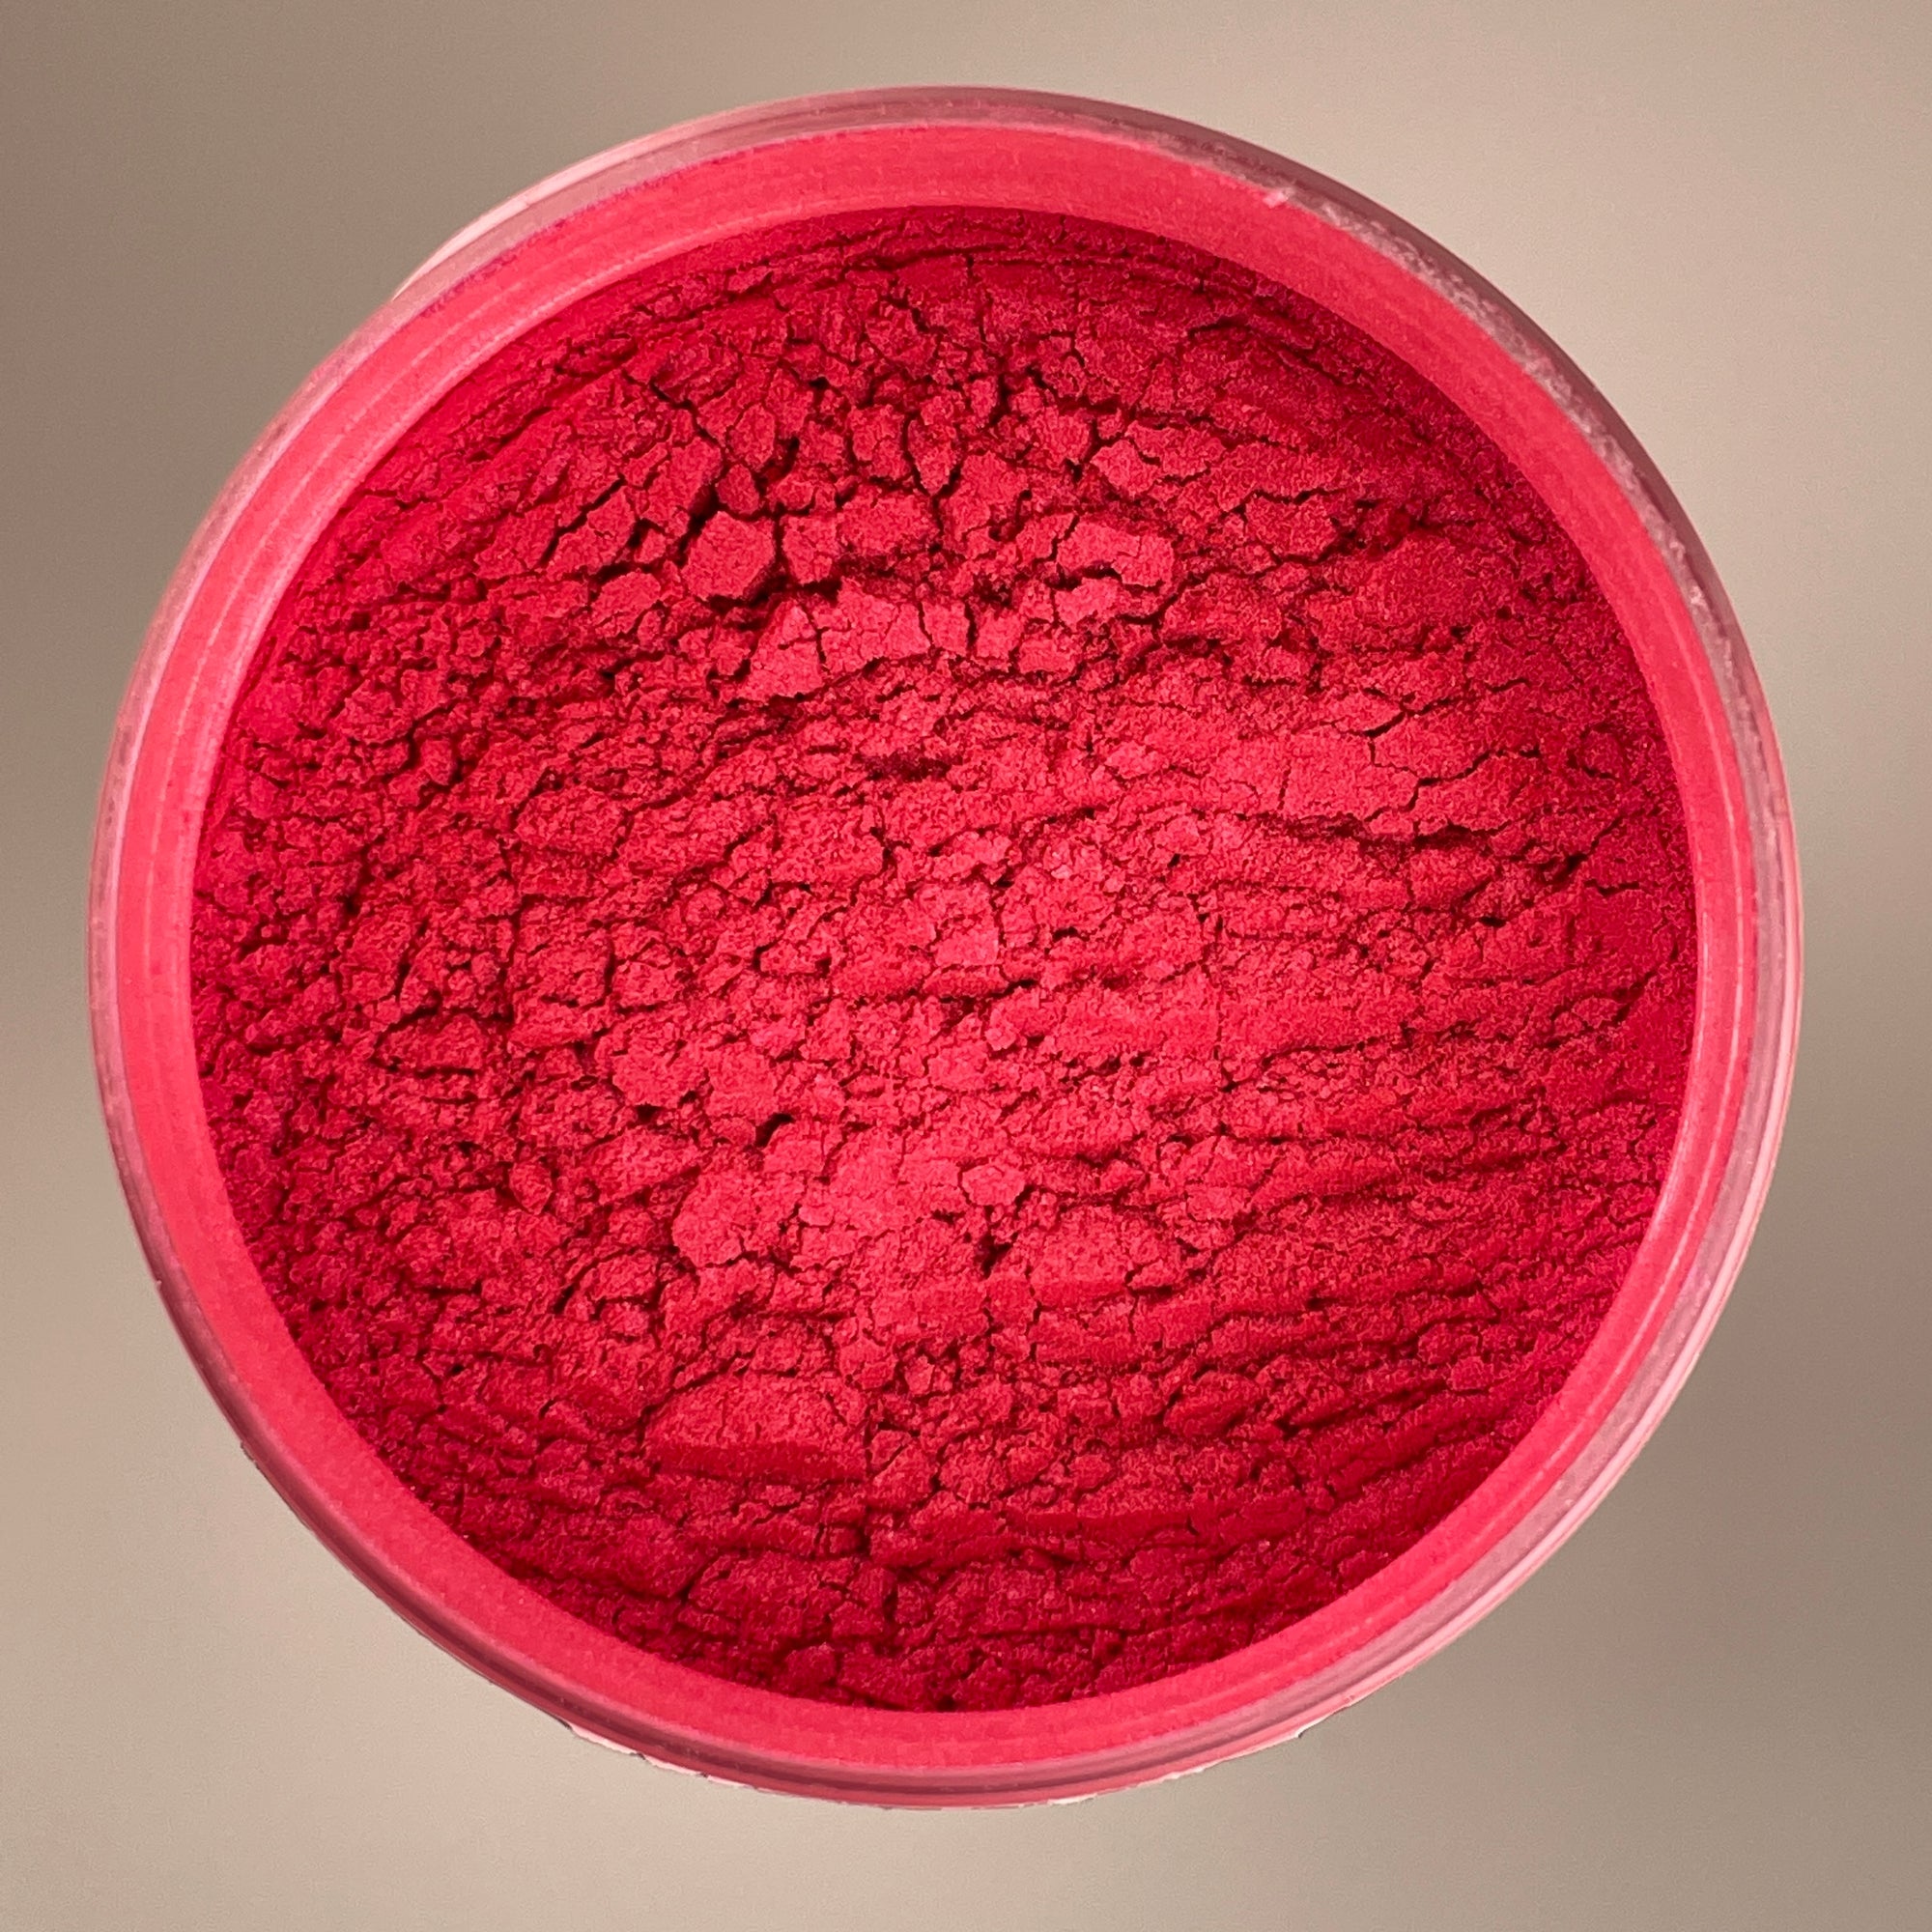 hot pink colour for a vibrant effect to what ever you put this mica powder in